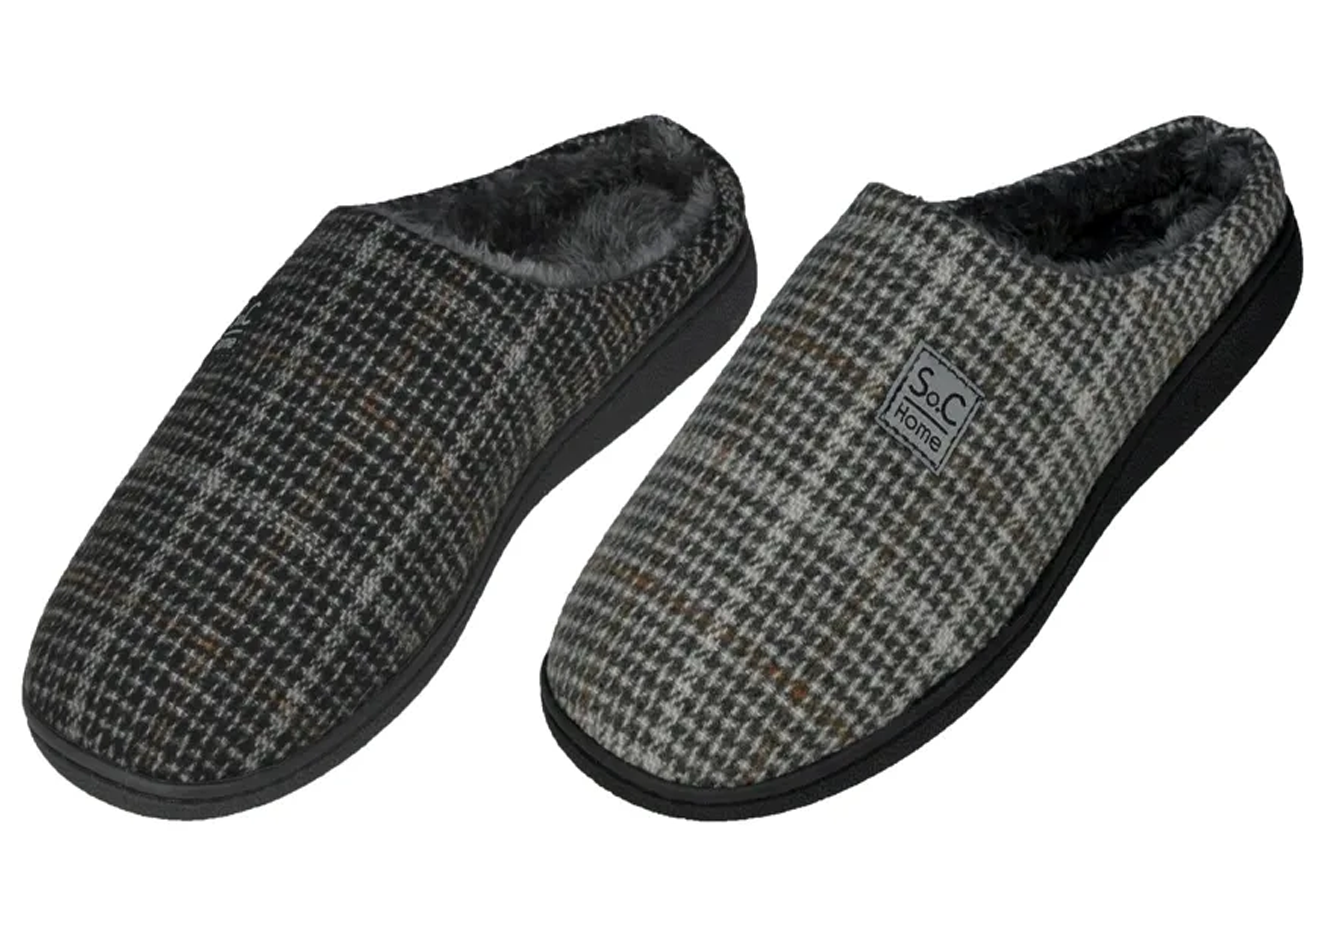 Wholesale Men's Slippers Gents Slooze Mix Assorted Colors Sizes Feet Warmer Burgess NSU13